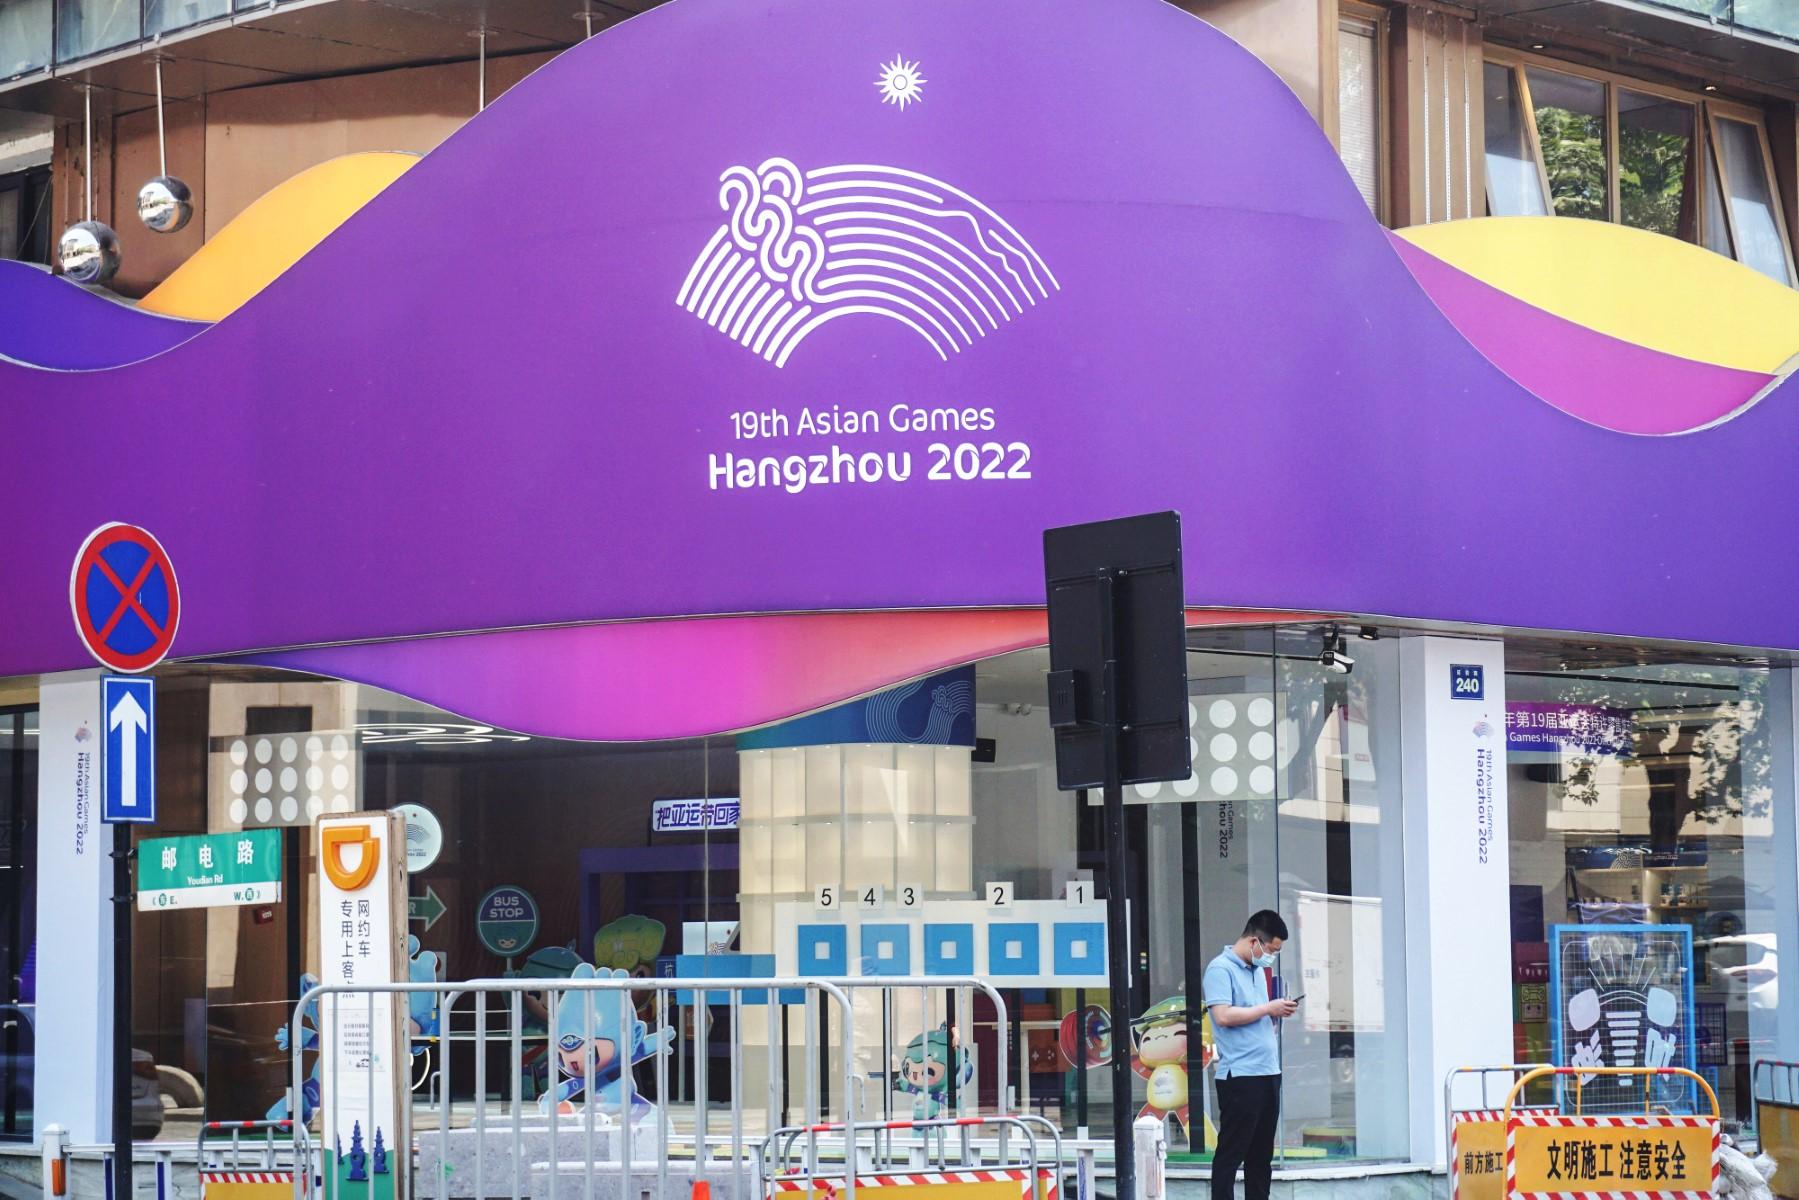 A man checks his phone outside a souvenir store for the 2022 Asian Games in Hangzhou, in China's eastern Zhejiang province on May 6. Photo: AFP